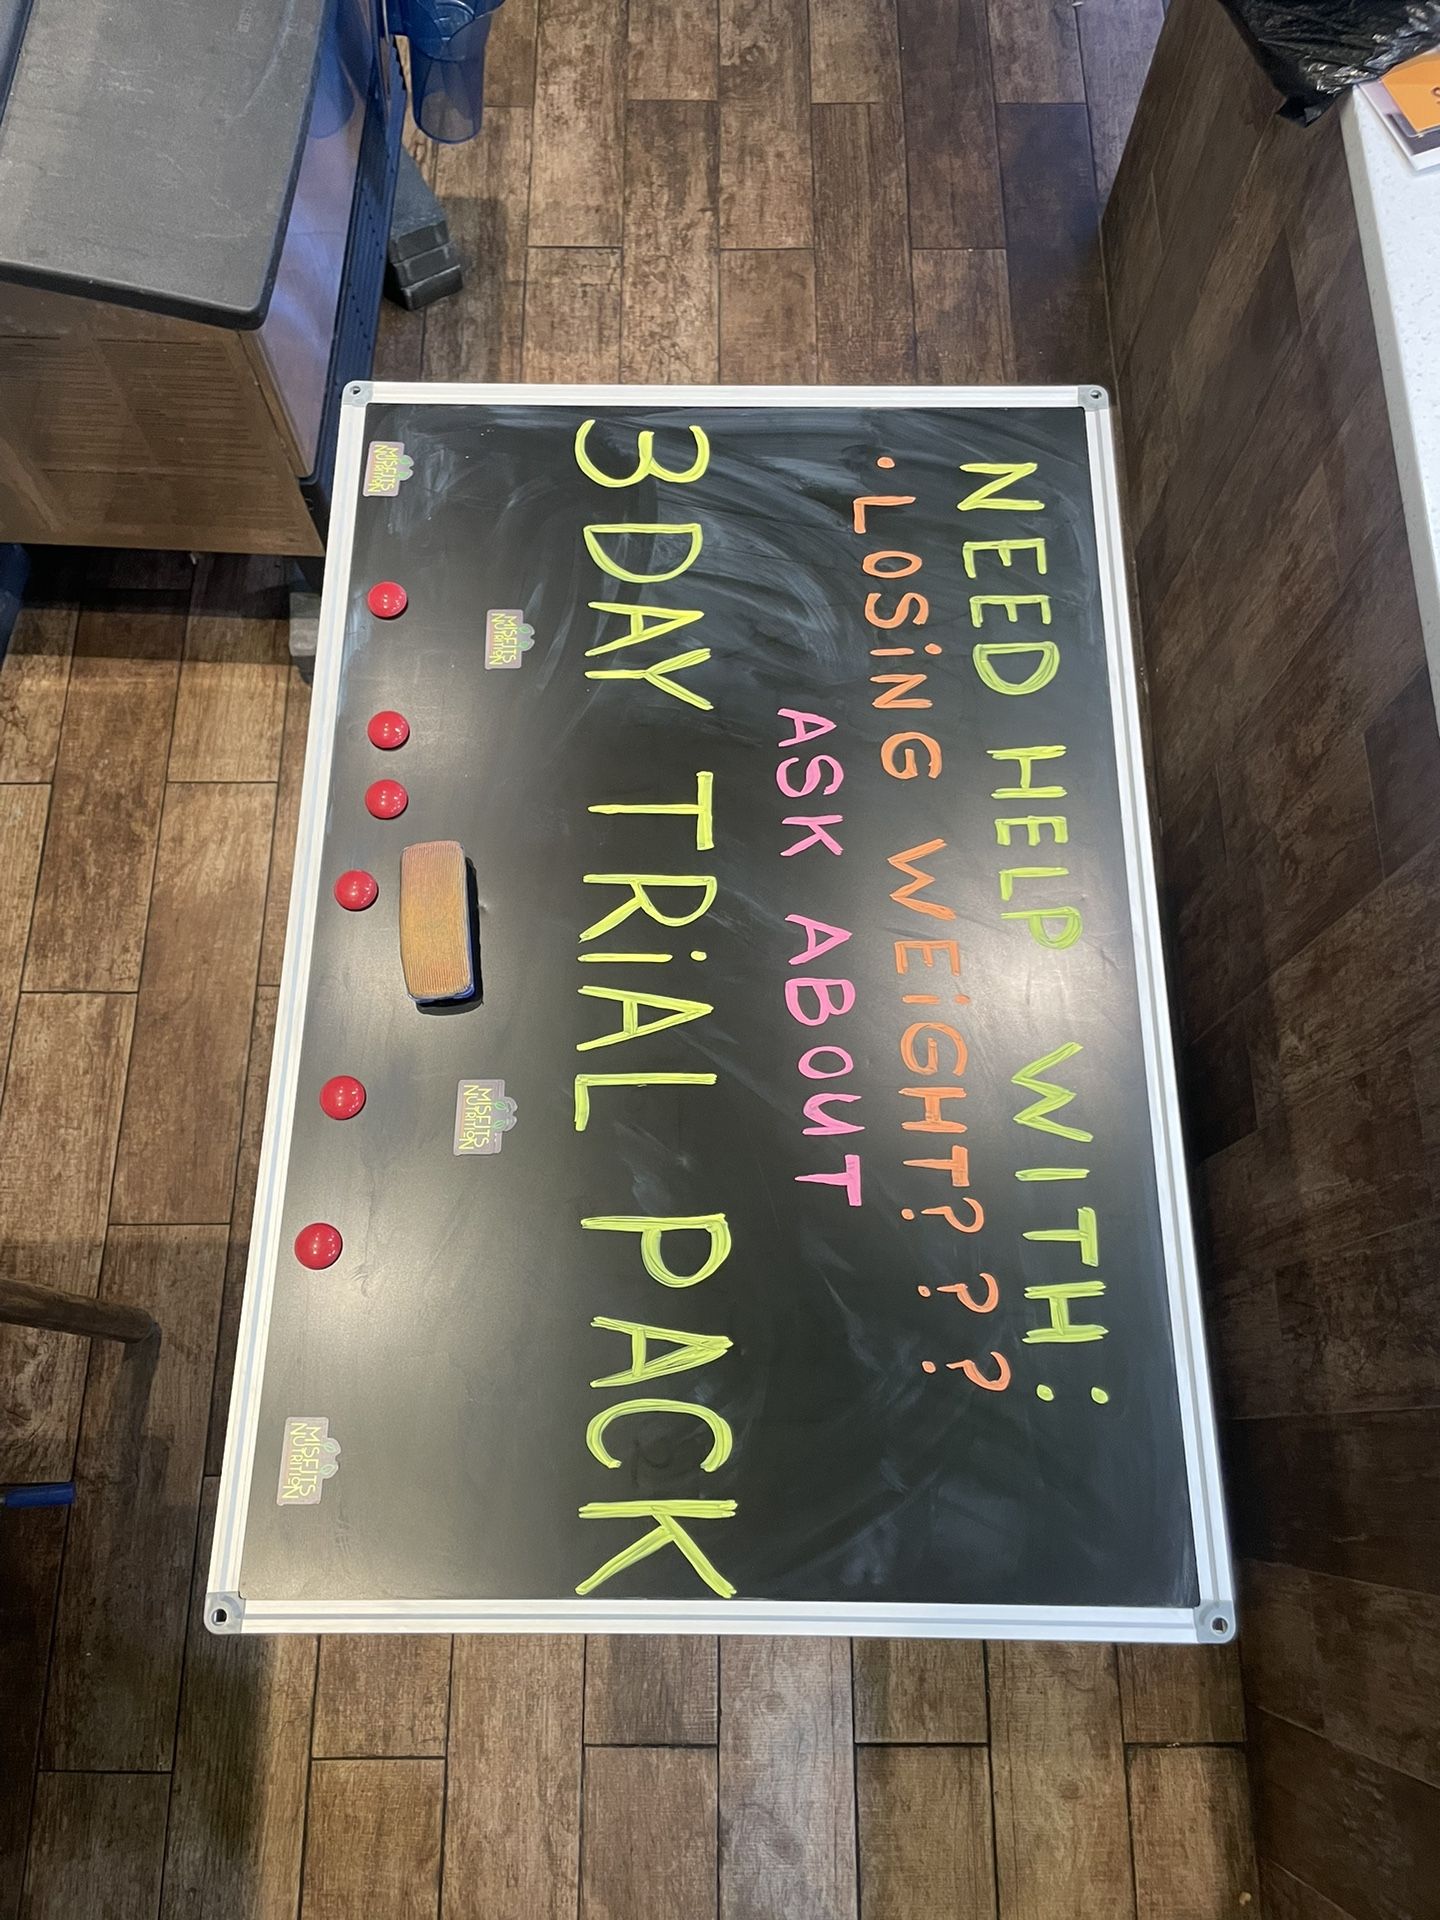 Large Magnetic Chalkboard with Eraser, Magnets, and Tray - 36” W x 24”H